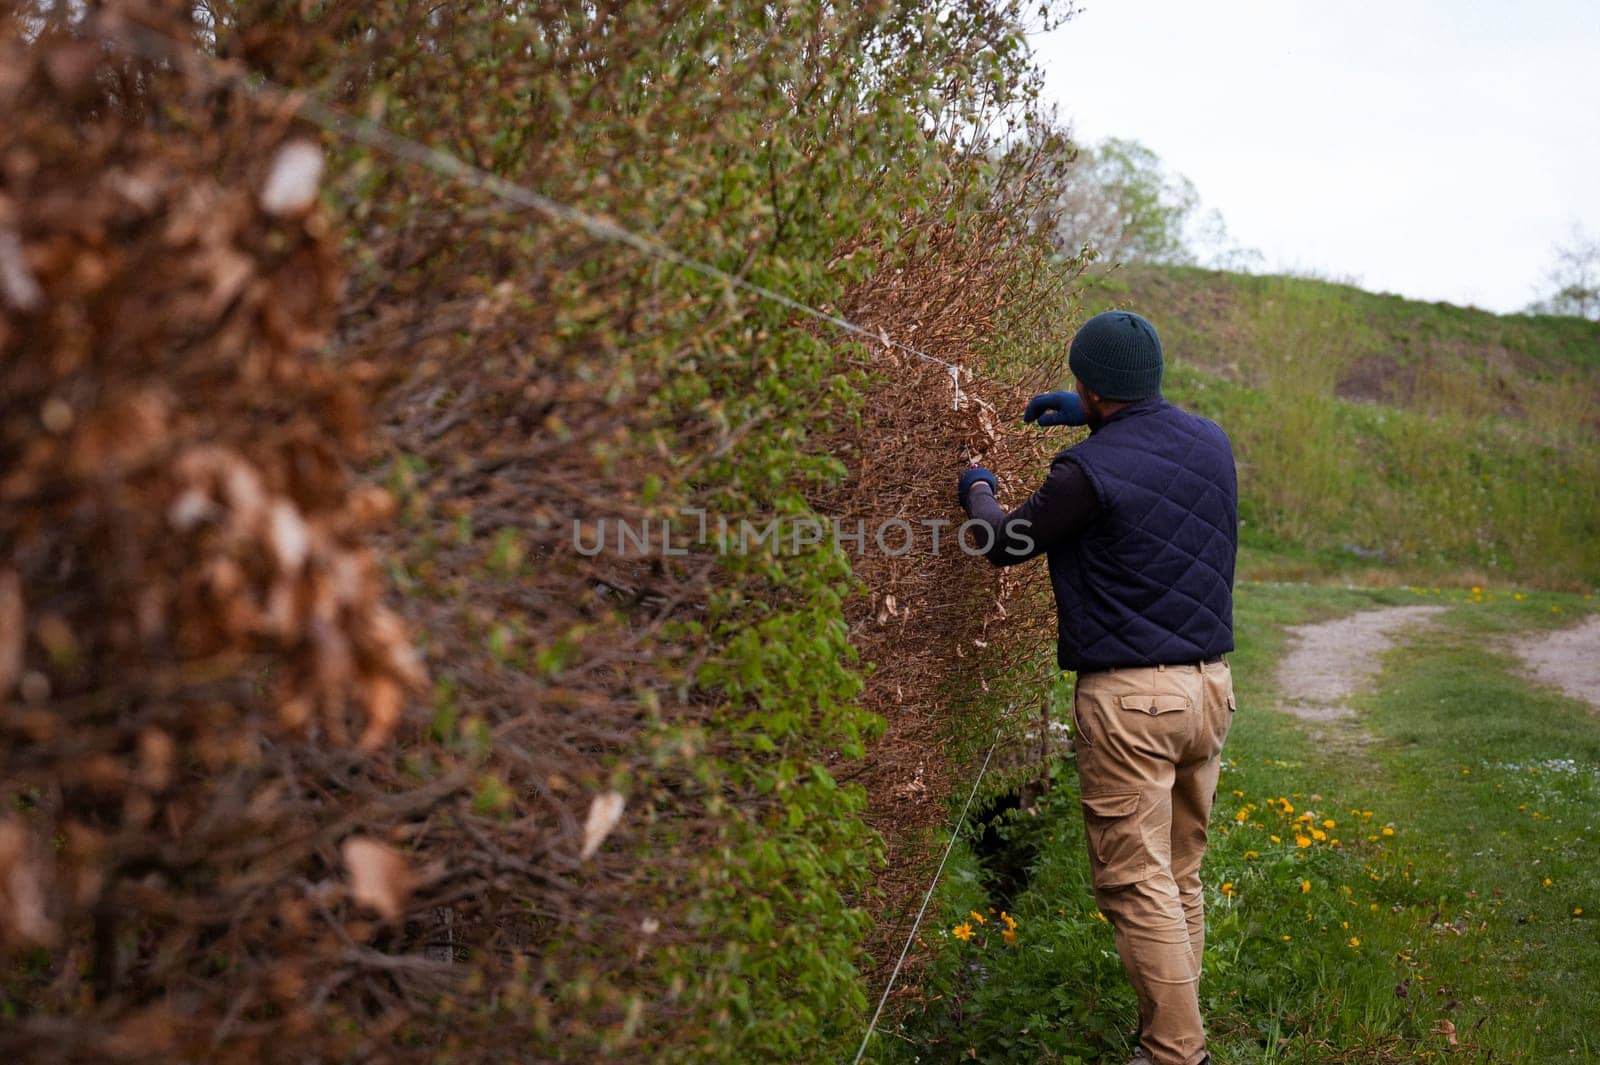 A male gardener trims a hedge in early spring, straightening it with taut laces, trimming the hedge with scissors.